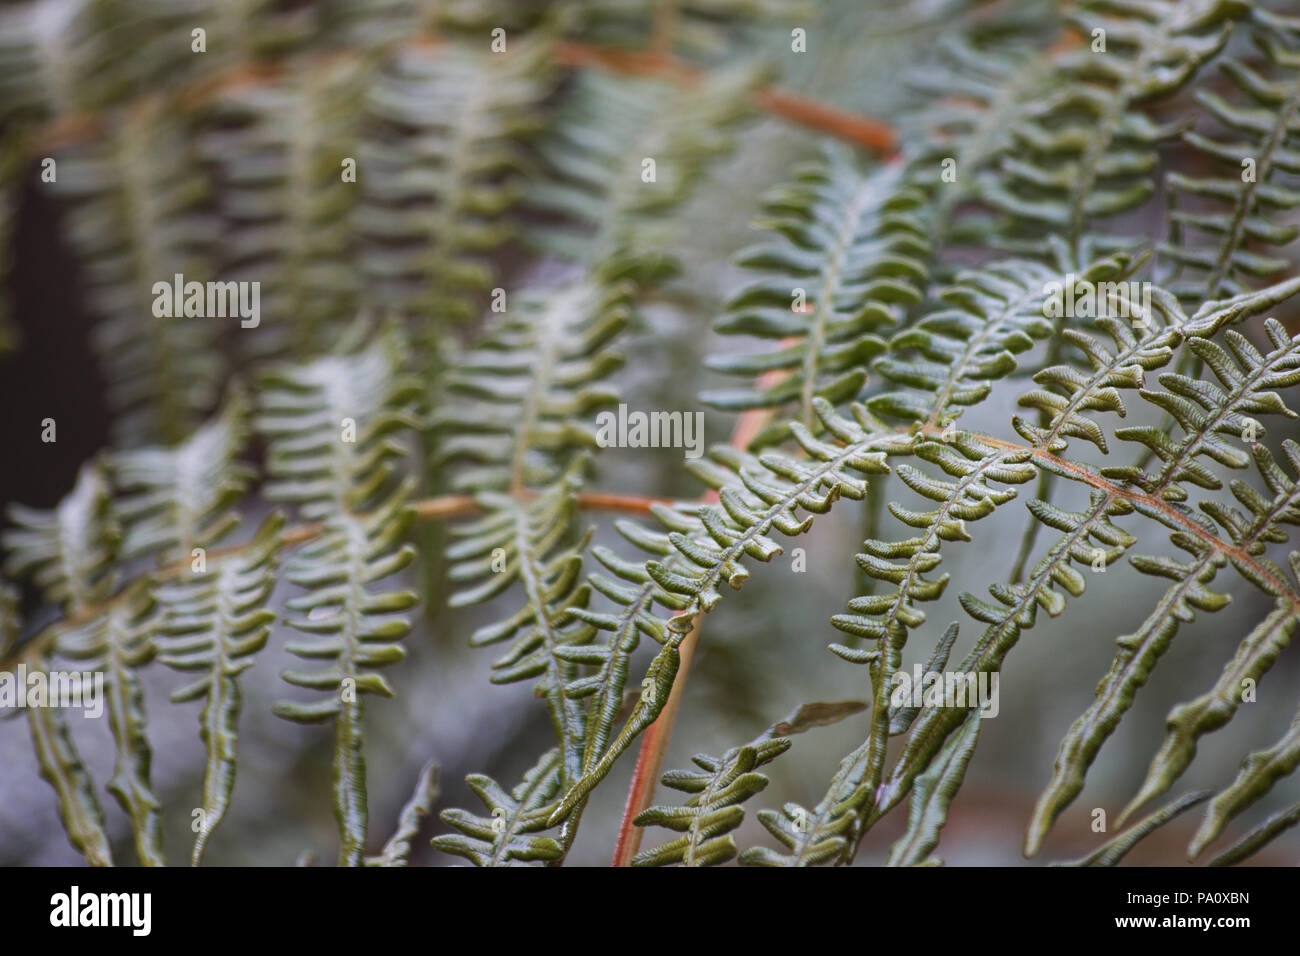 Fern fronds on natural background Stock Photo